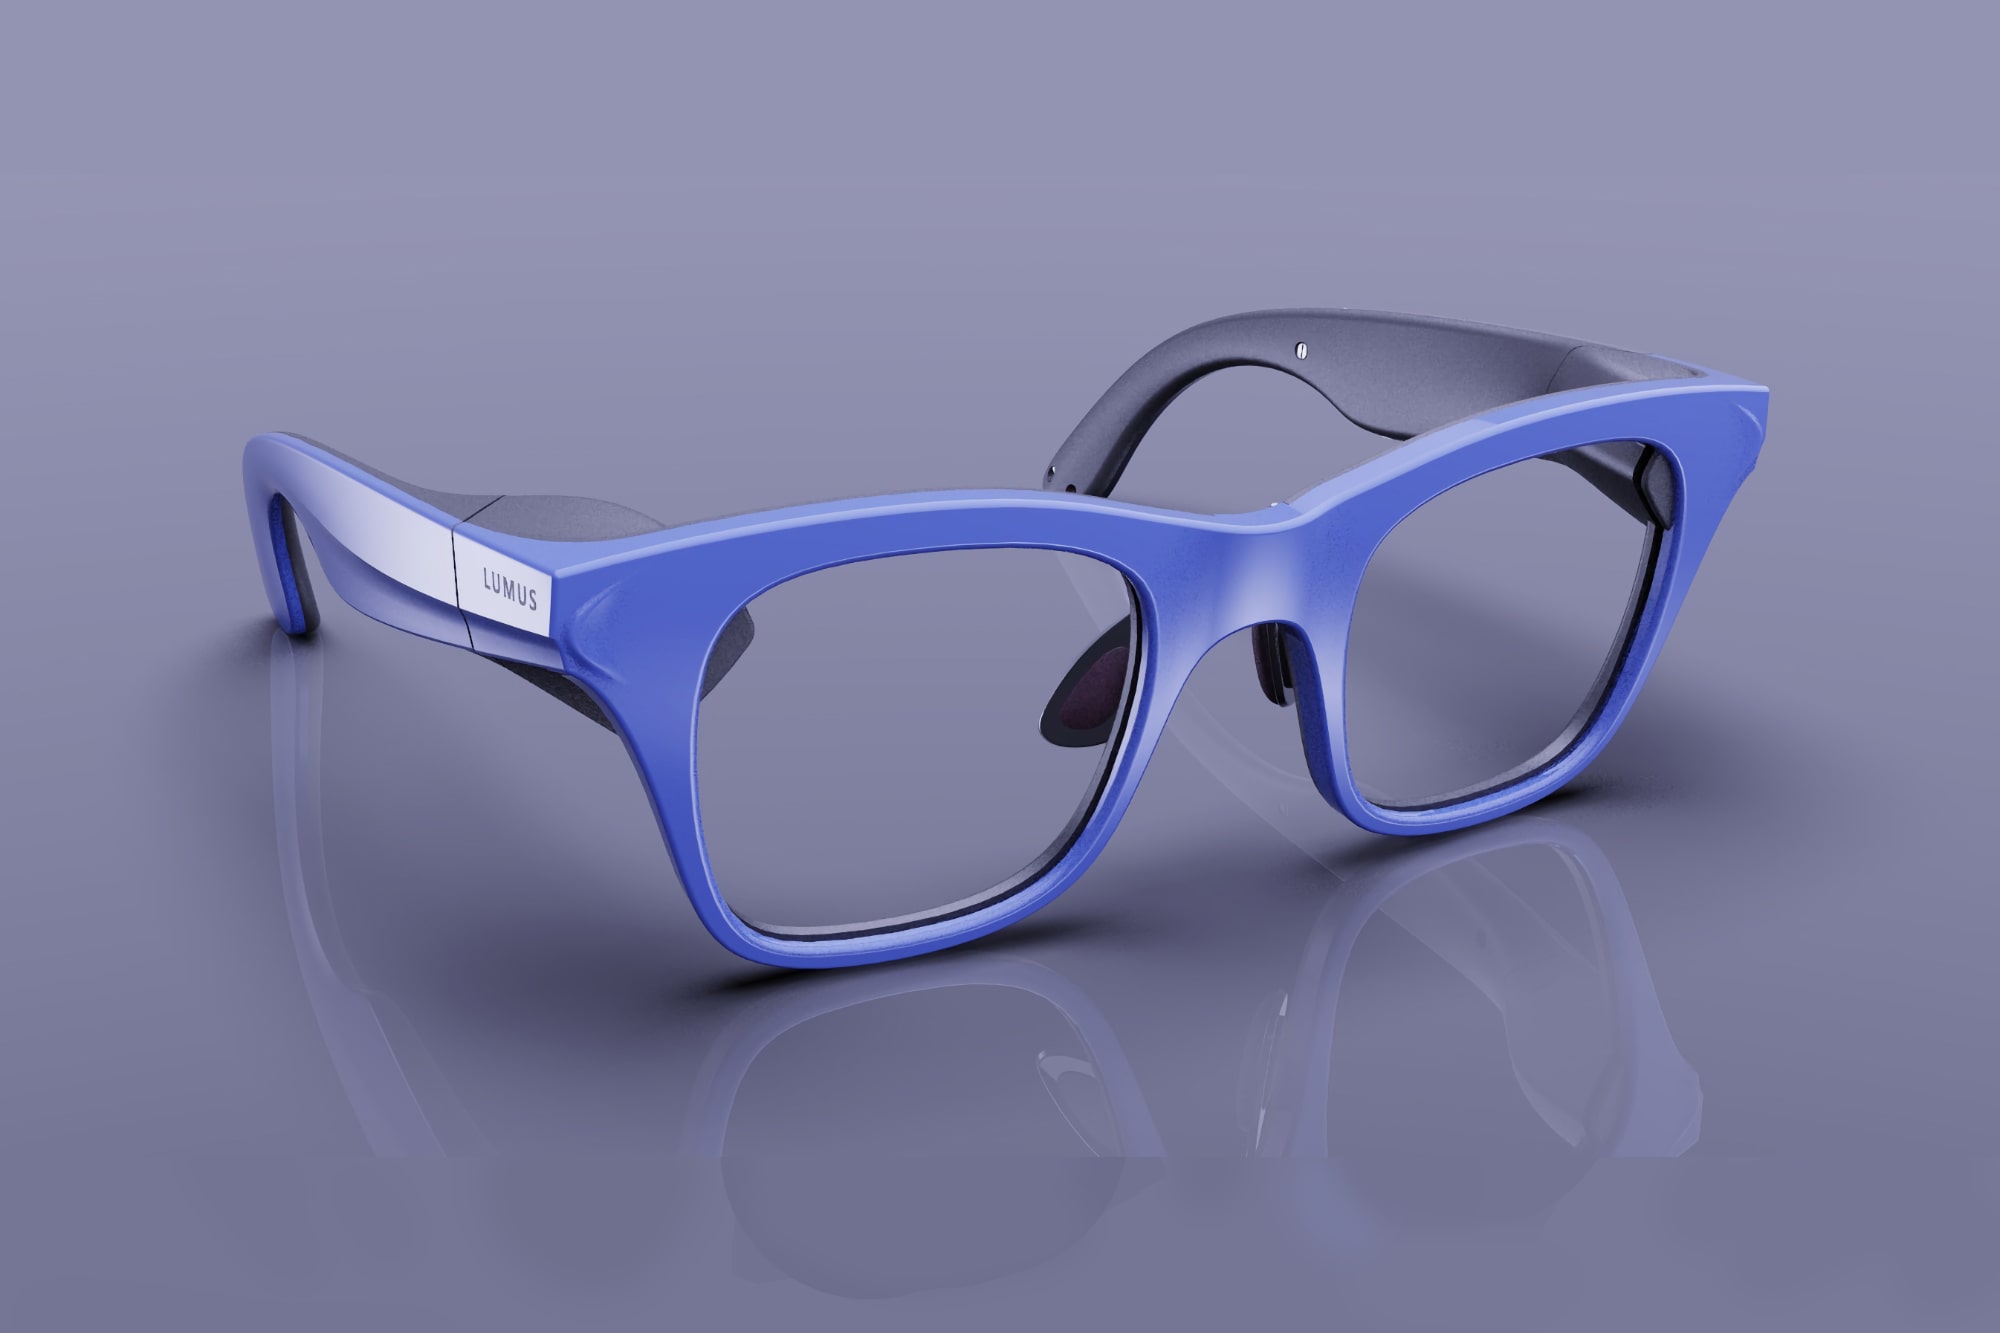 Lumus Z-Lens waveguide allows for thin, stylish AR glasses